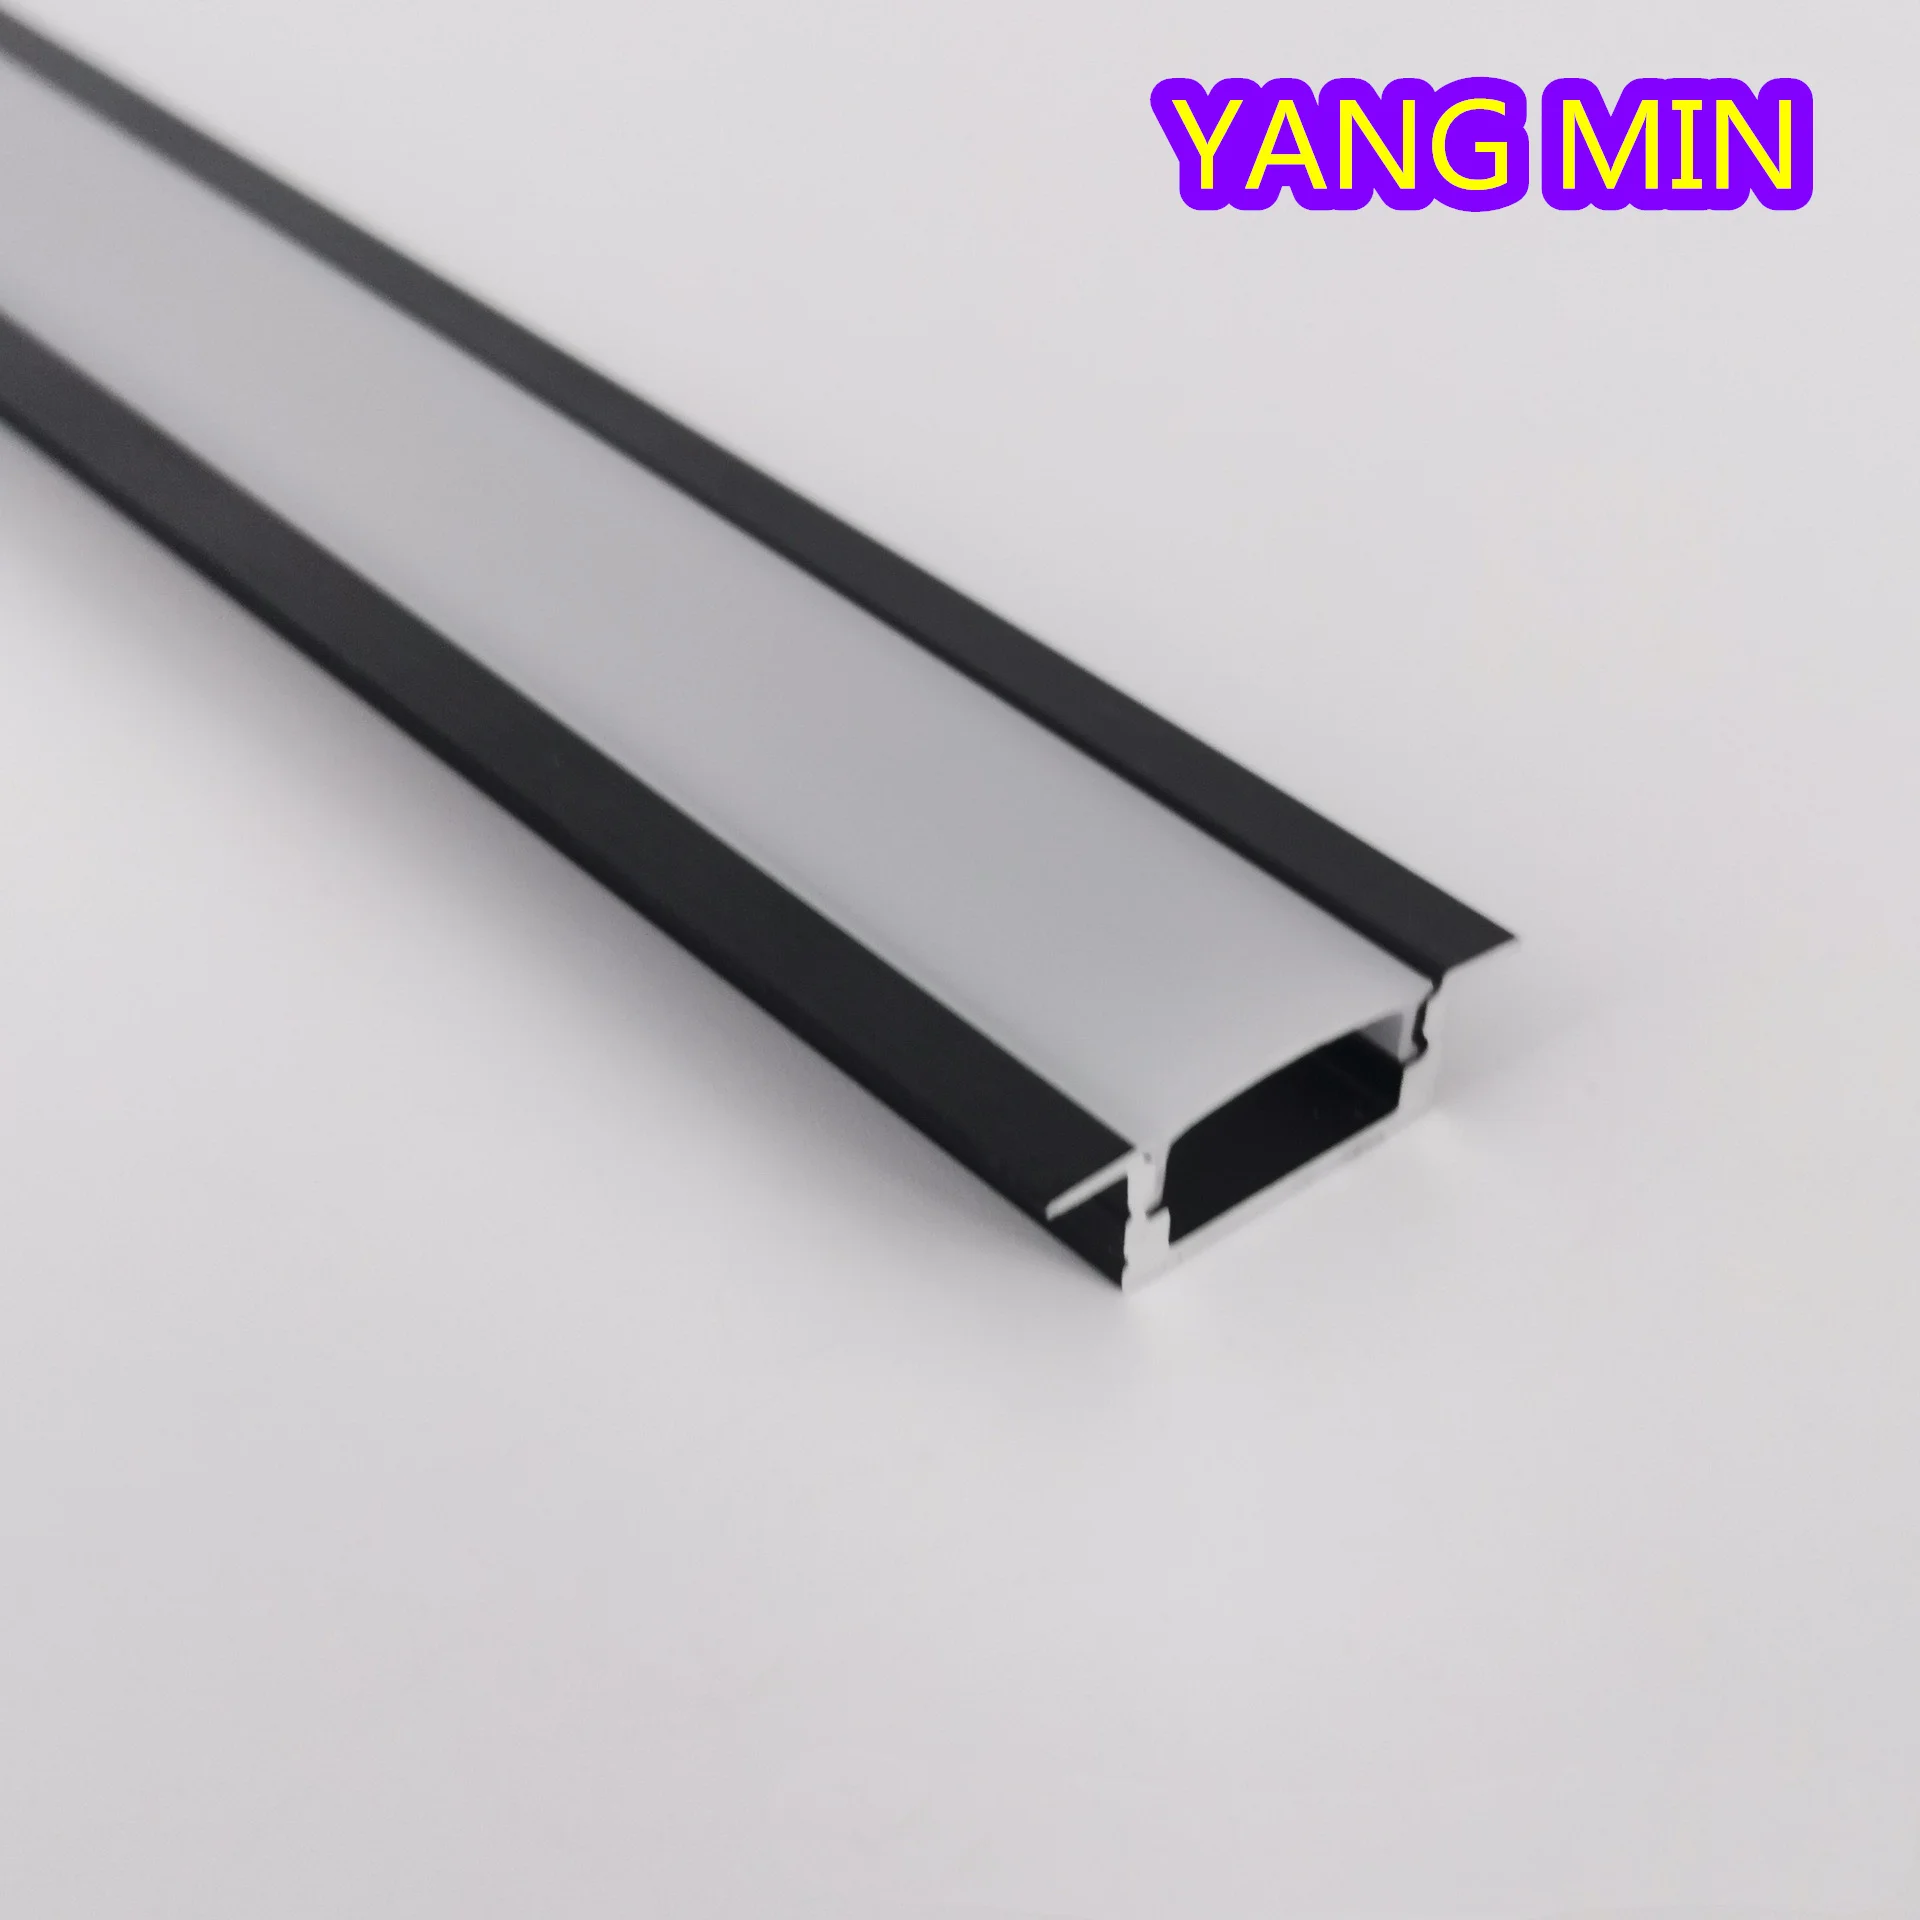 1m/pcs Kitchen Bar Cabinet Ceiling Light Strip Alu U Shape Housing Channel Diffused Cover Recessed Aluminum Extrusion Led Profie aisilan surface mounted led downlight ceiling light cree 7w 9w cri97 matte aluminum cob spot light for living room kitchen